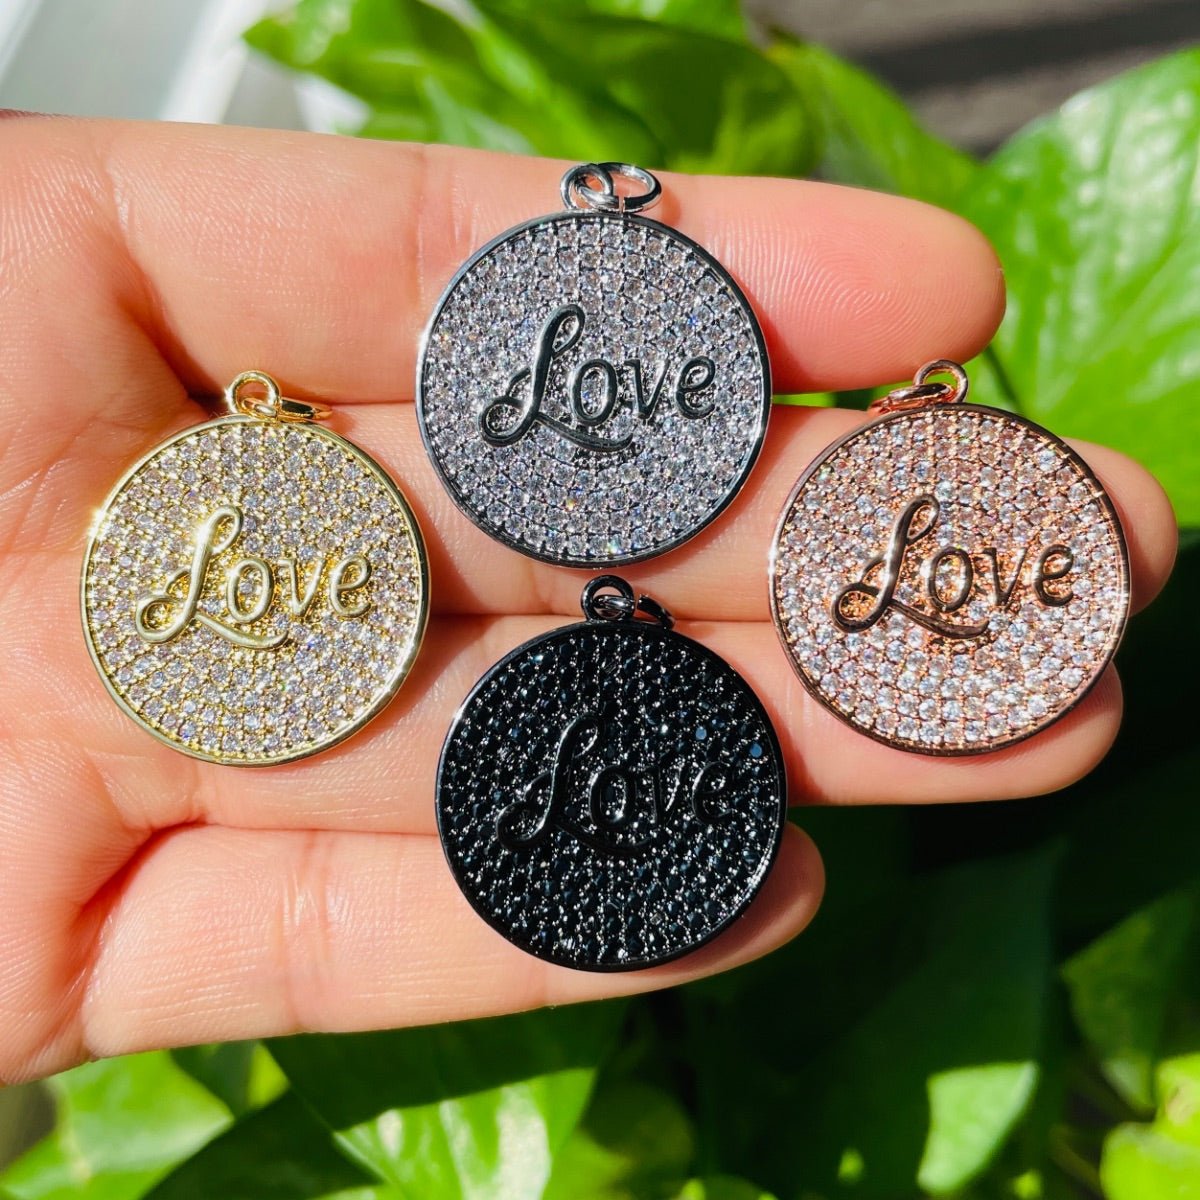 10pcs/lot 25mm CZ Pave Round Plate LOVE Quote Charms Mix Colors CZ Paved Charms Christian Quotes Discs On Sale Charms Beads Beyond